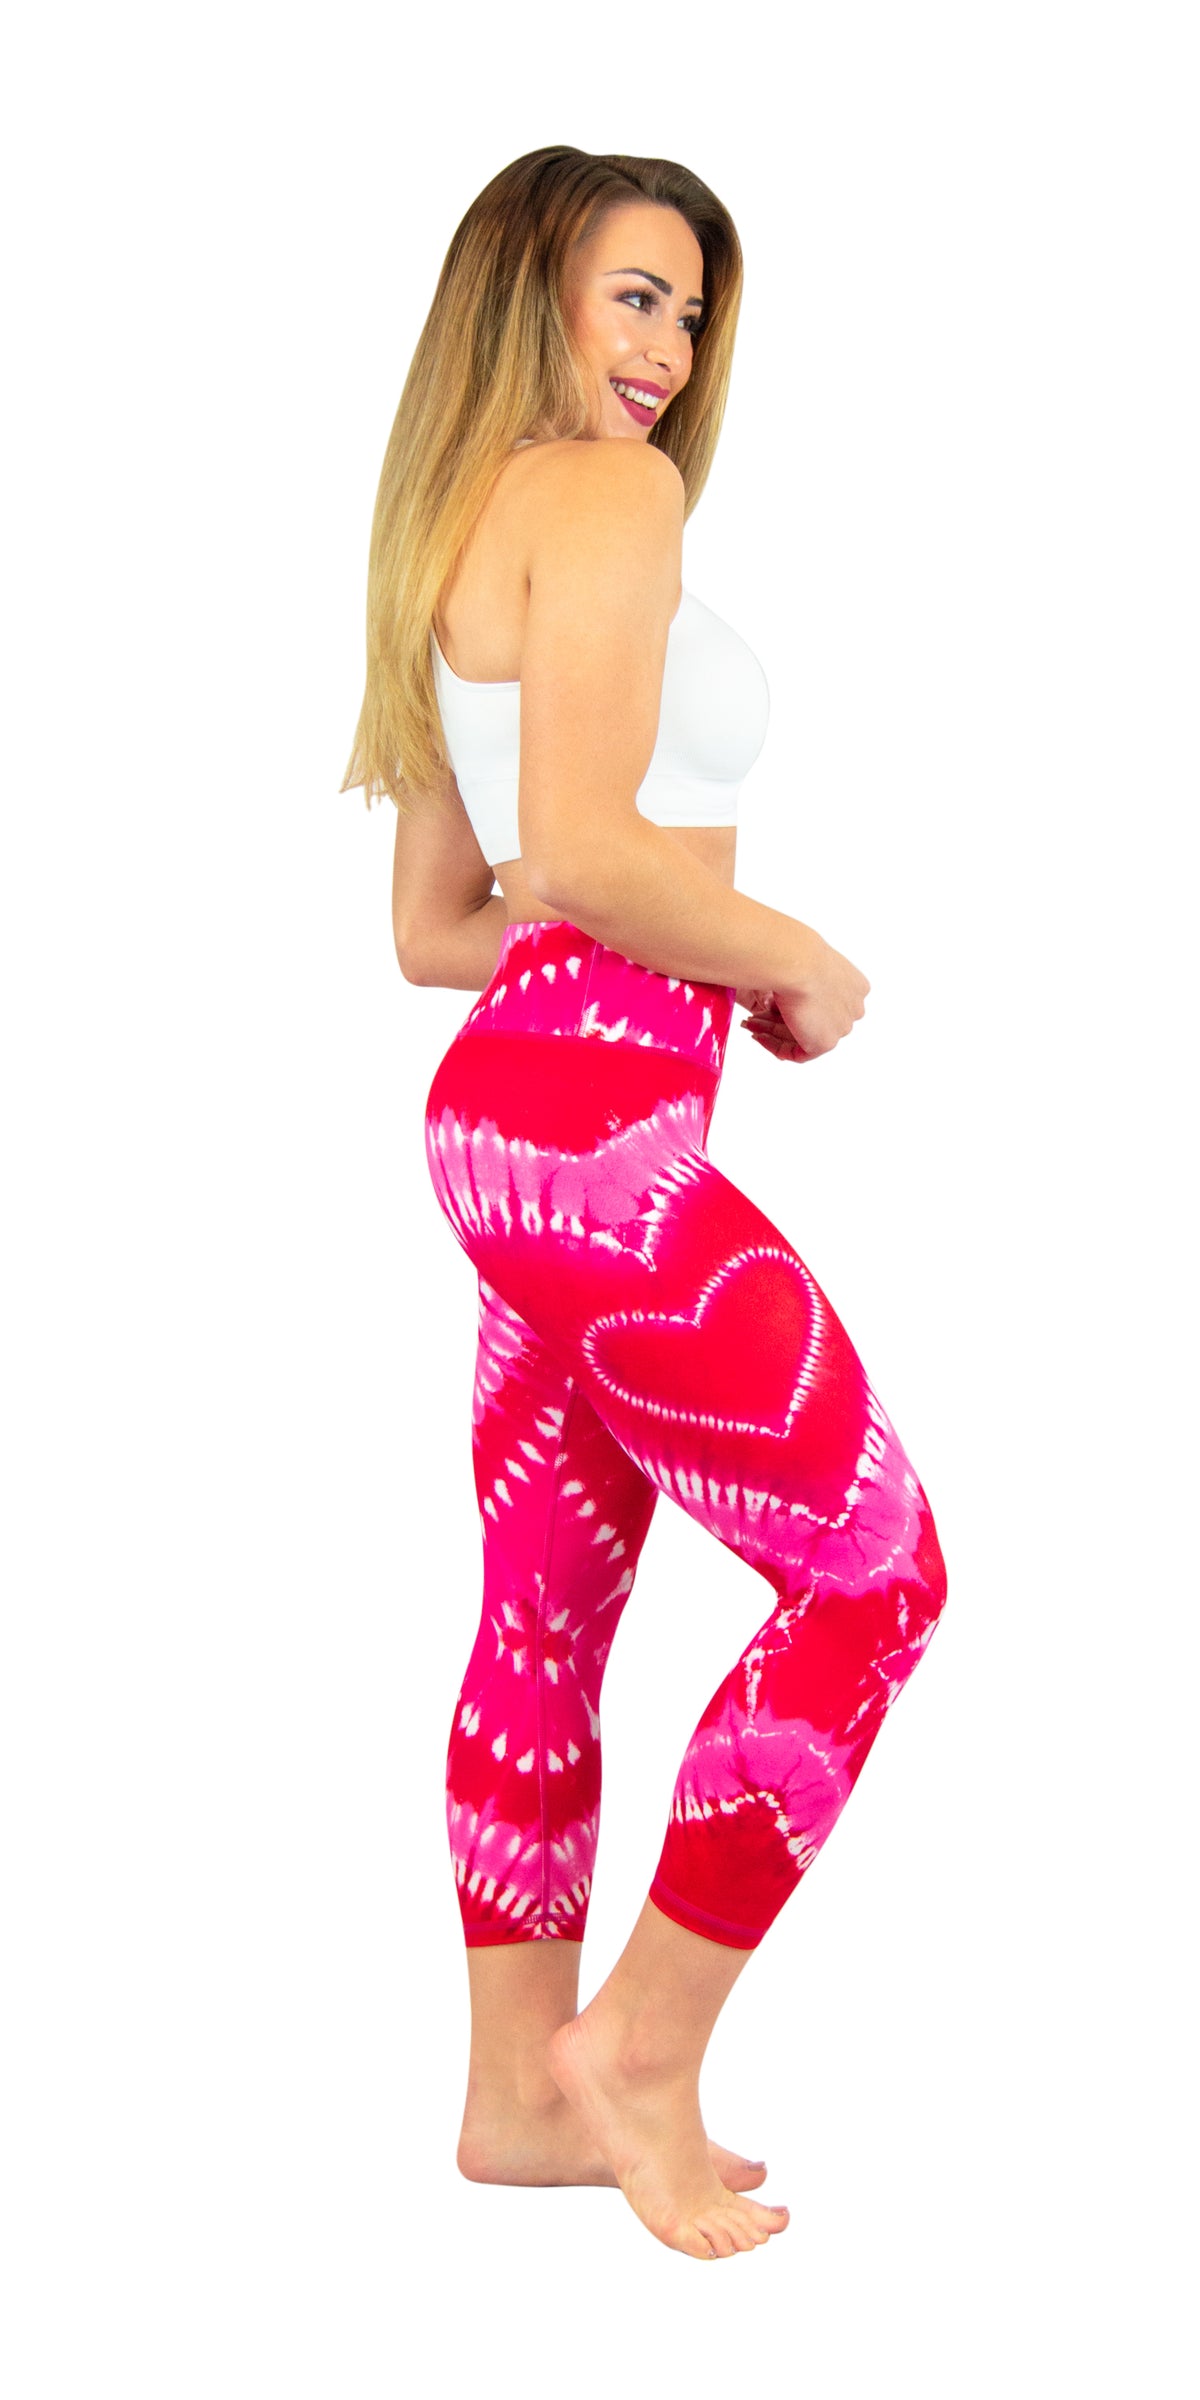 Peace and Love - Legging miamifitwear - Get the look at a lower cost